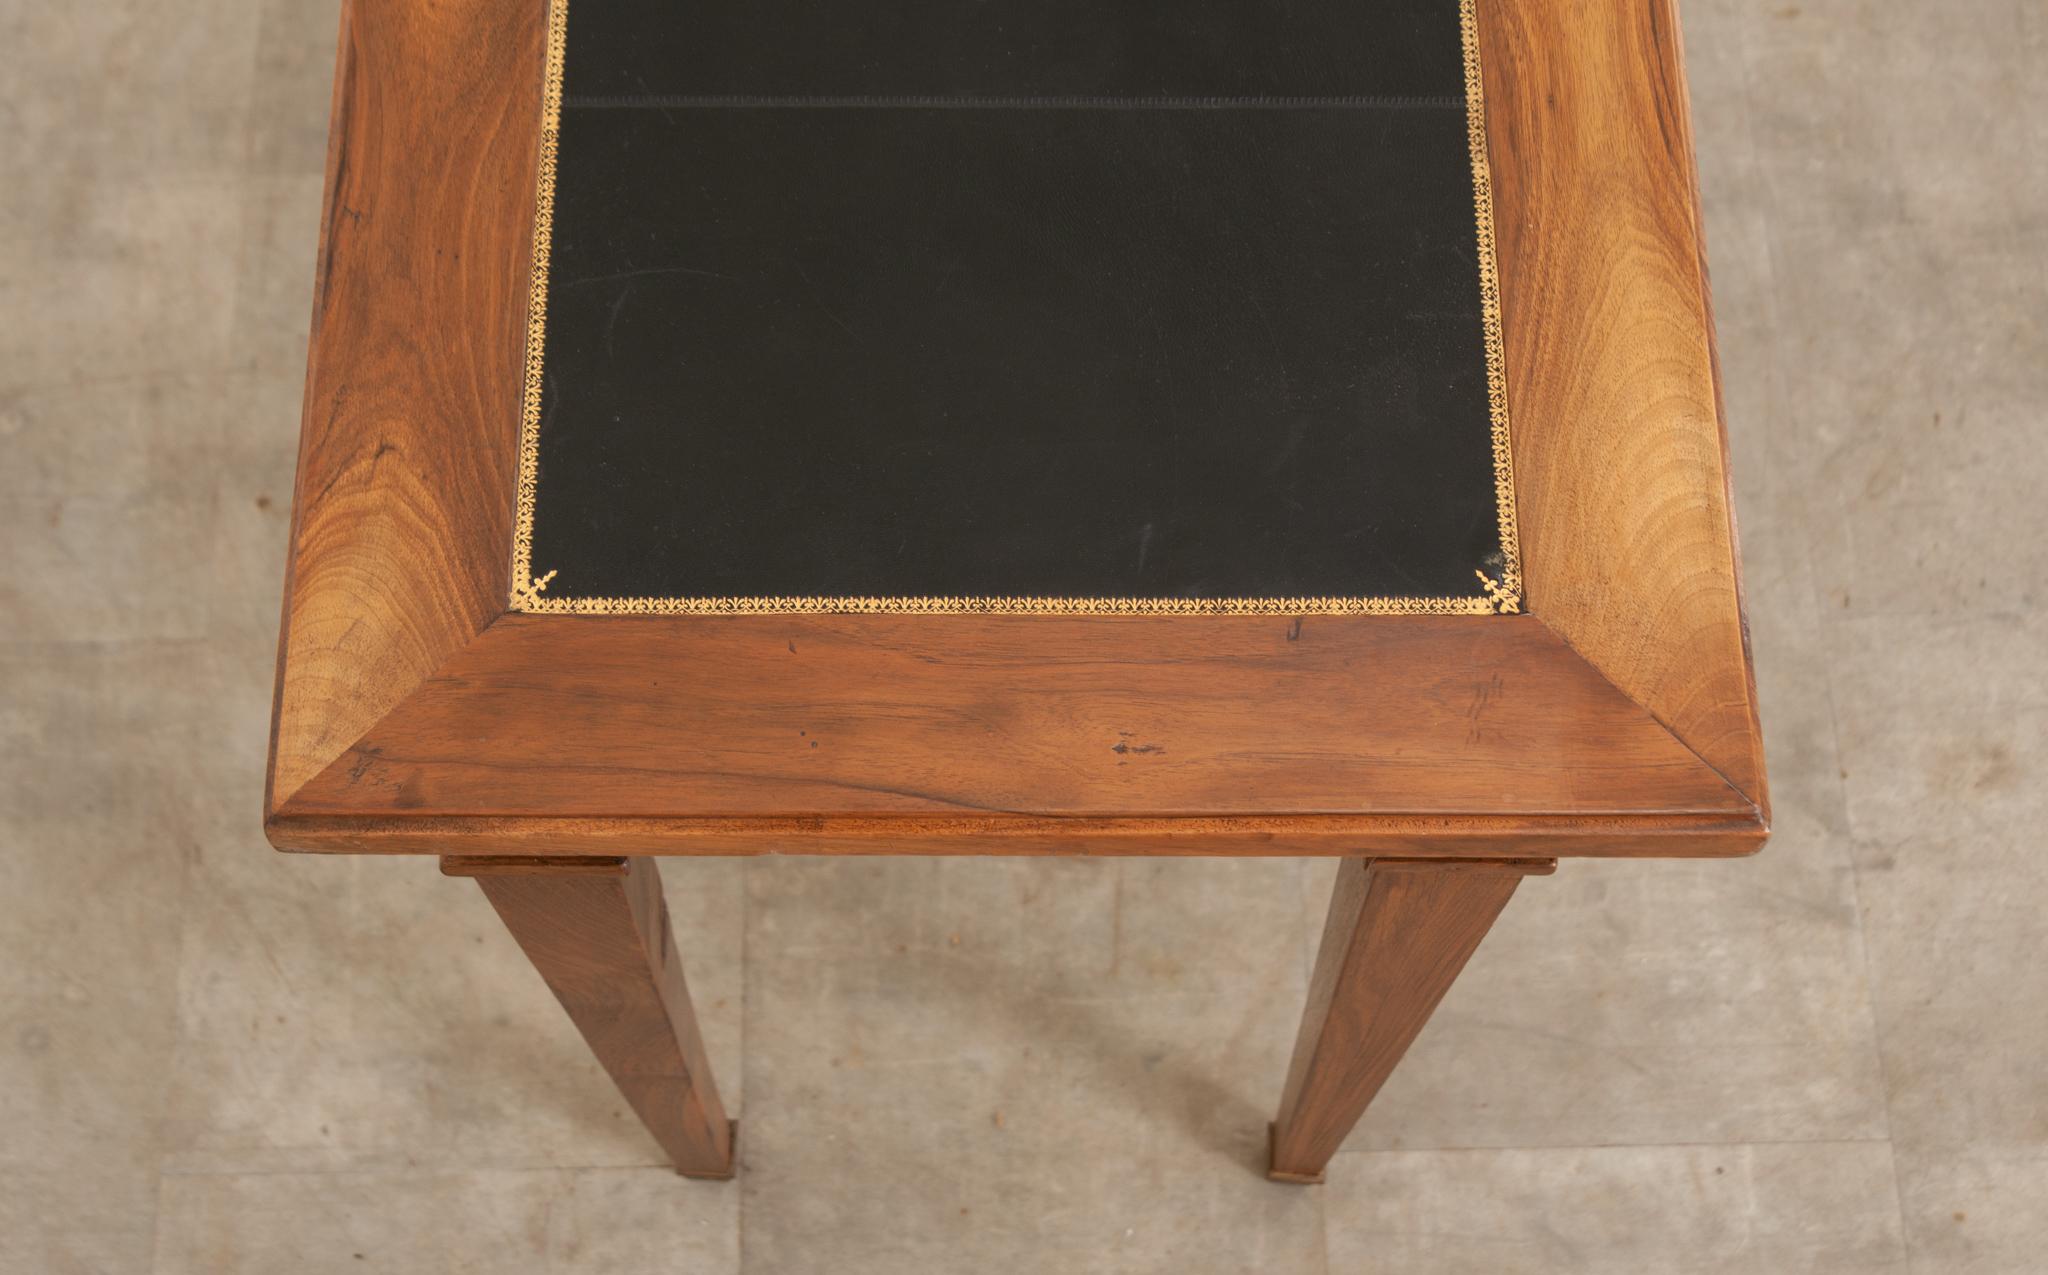 This petite writing desk made of solid mahogany is perfect for casually working or makes for a wonderful side table or console. The top features a gently worn black leather writing surface with classic gold embossed trim. There are two functioning